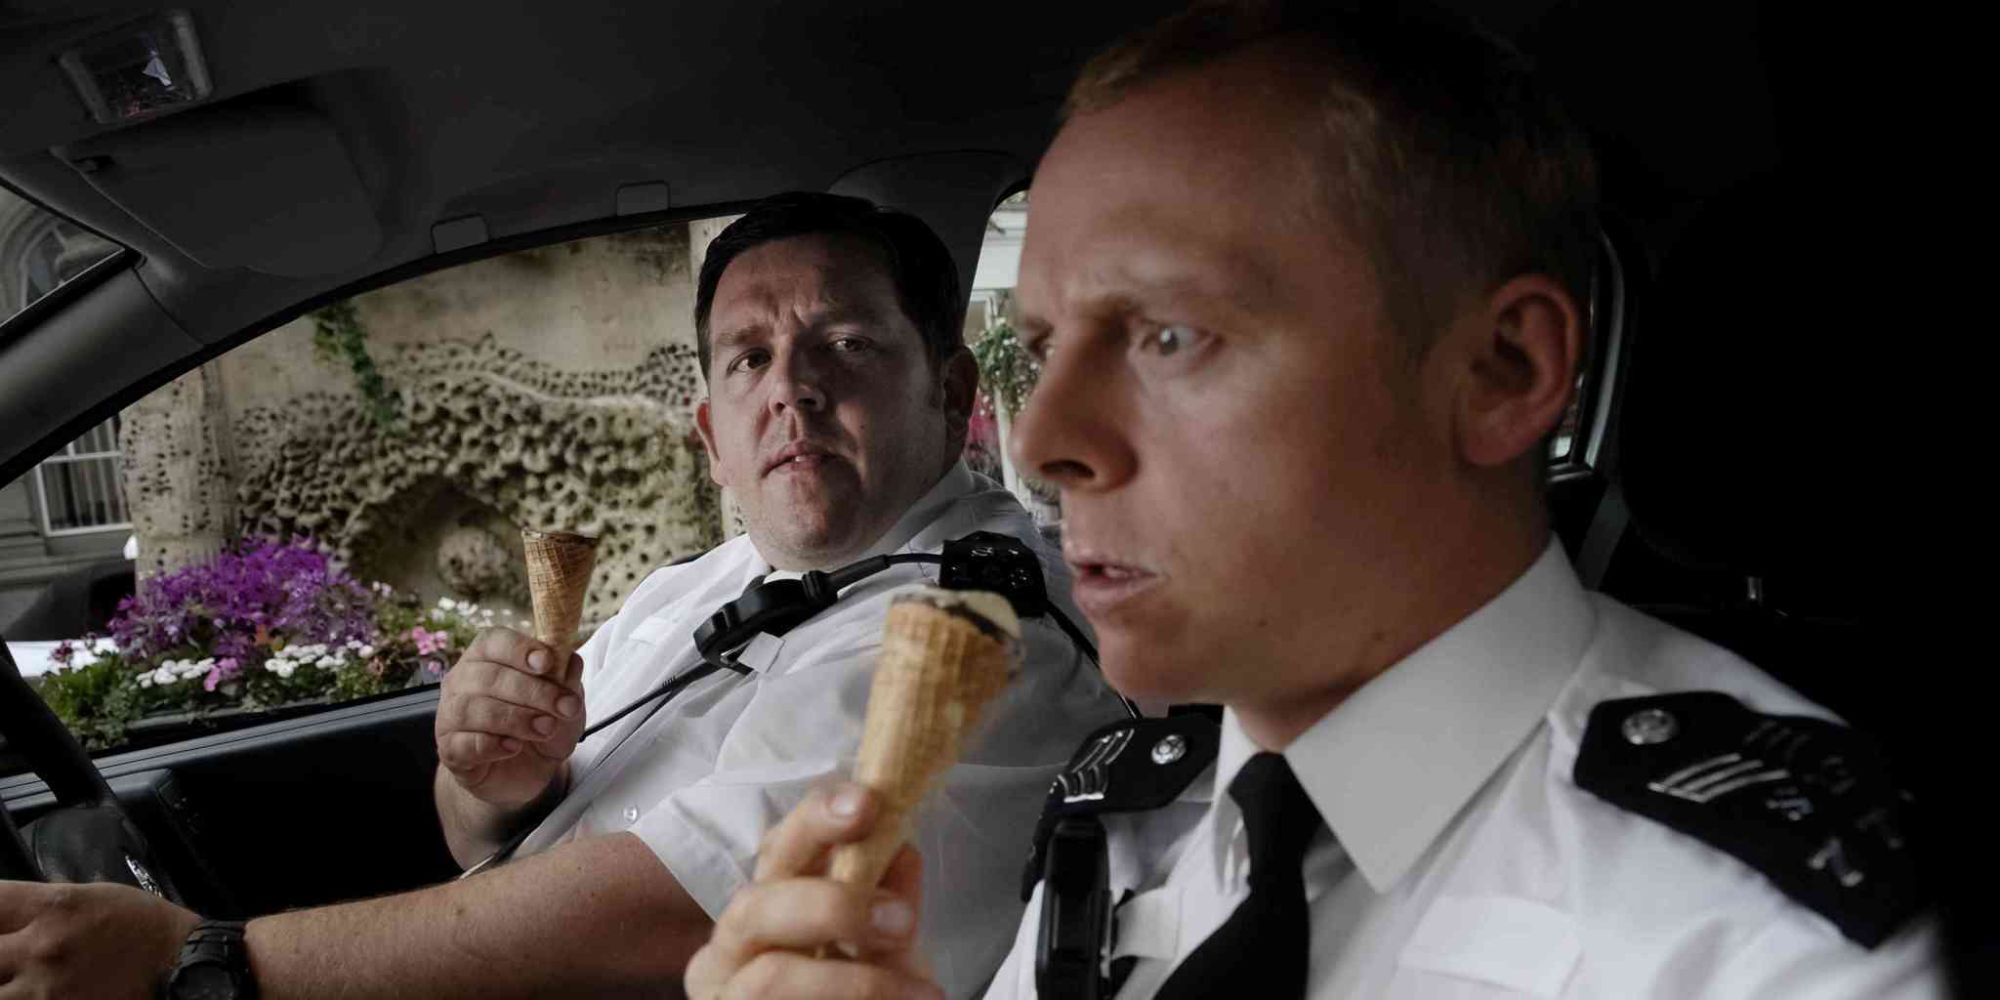 Two police officers sit in a car eating Cornetto ice creams in 'Hot Fuzz'.